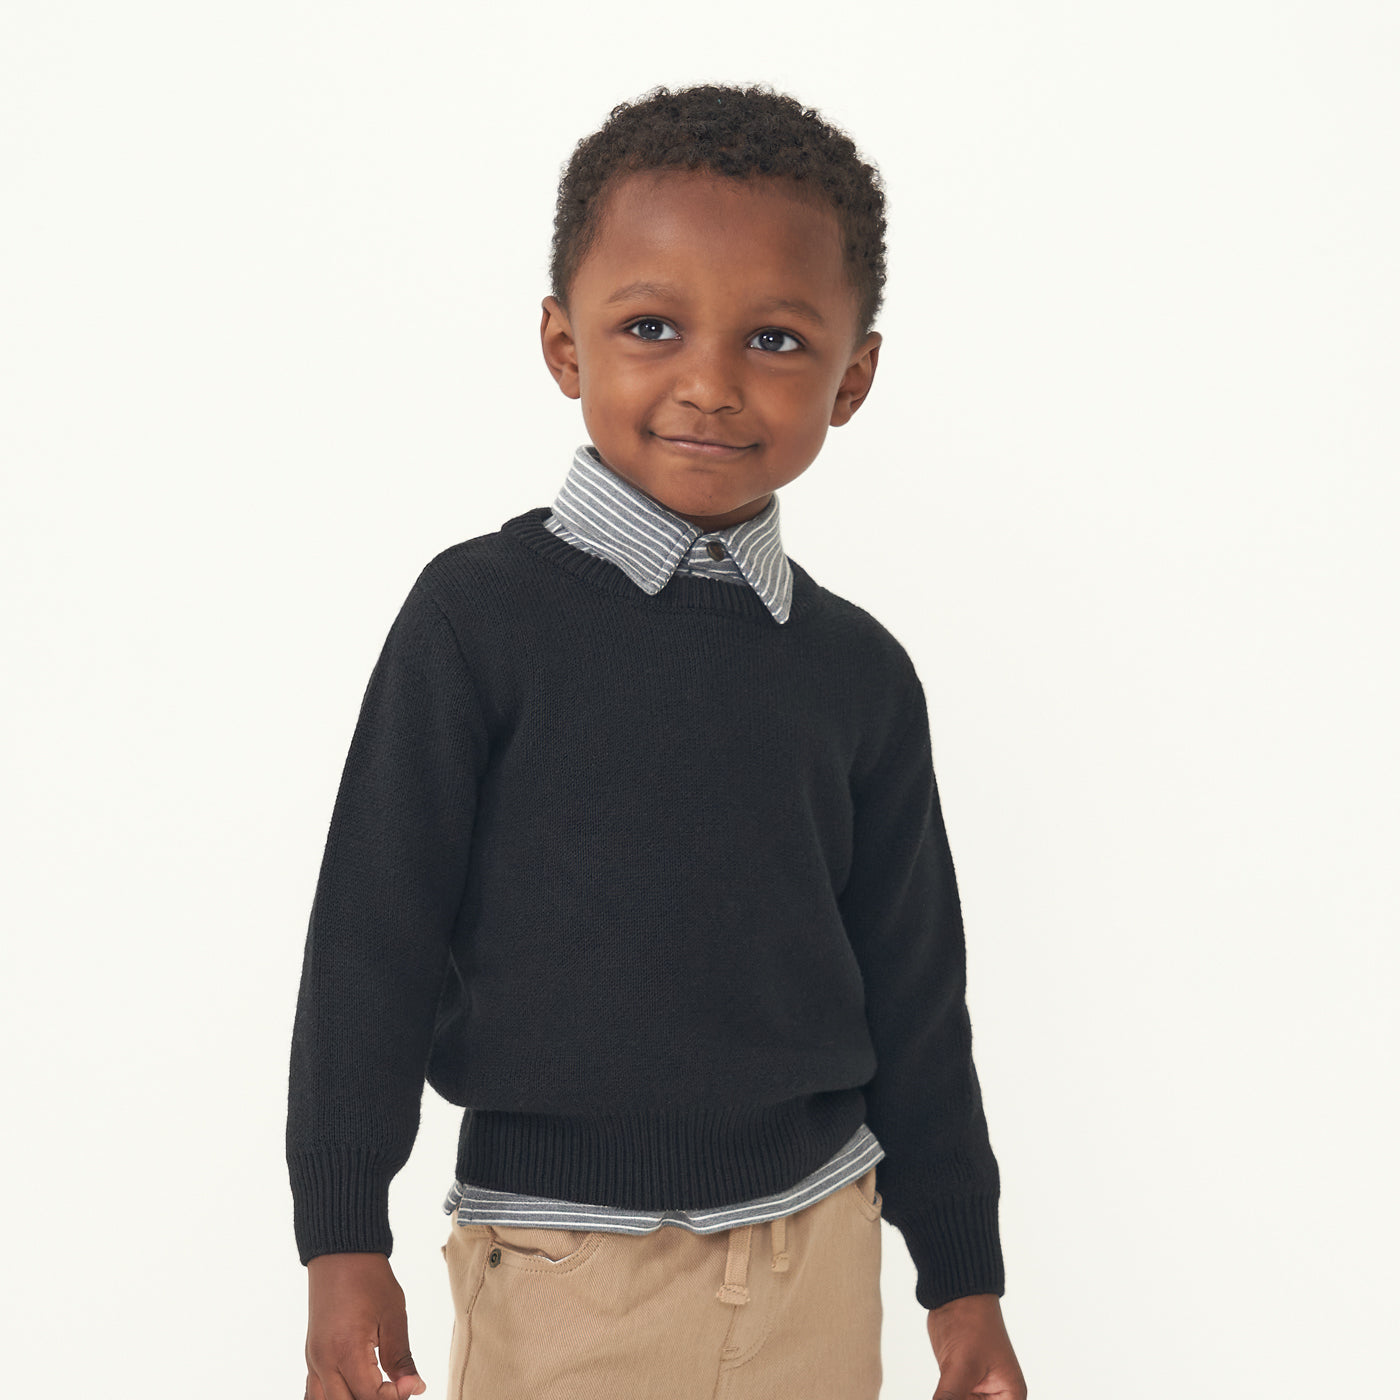 Child wearing a Black knit sweater and coordinating Heather Charcoal Stripes polo shirt